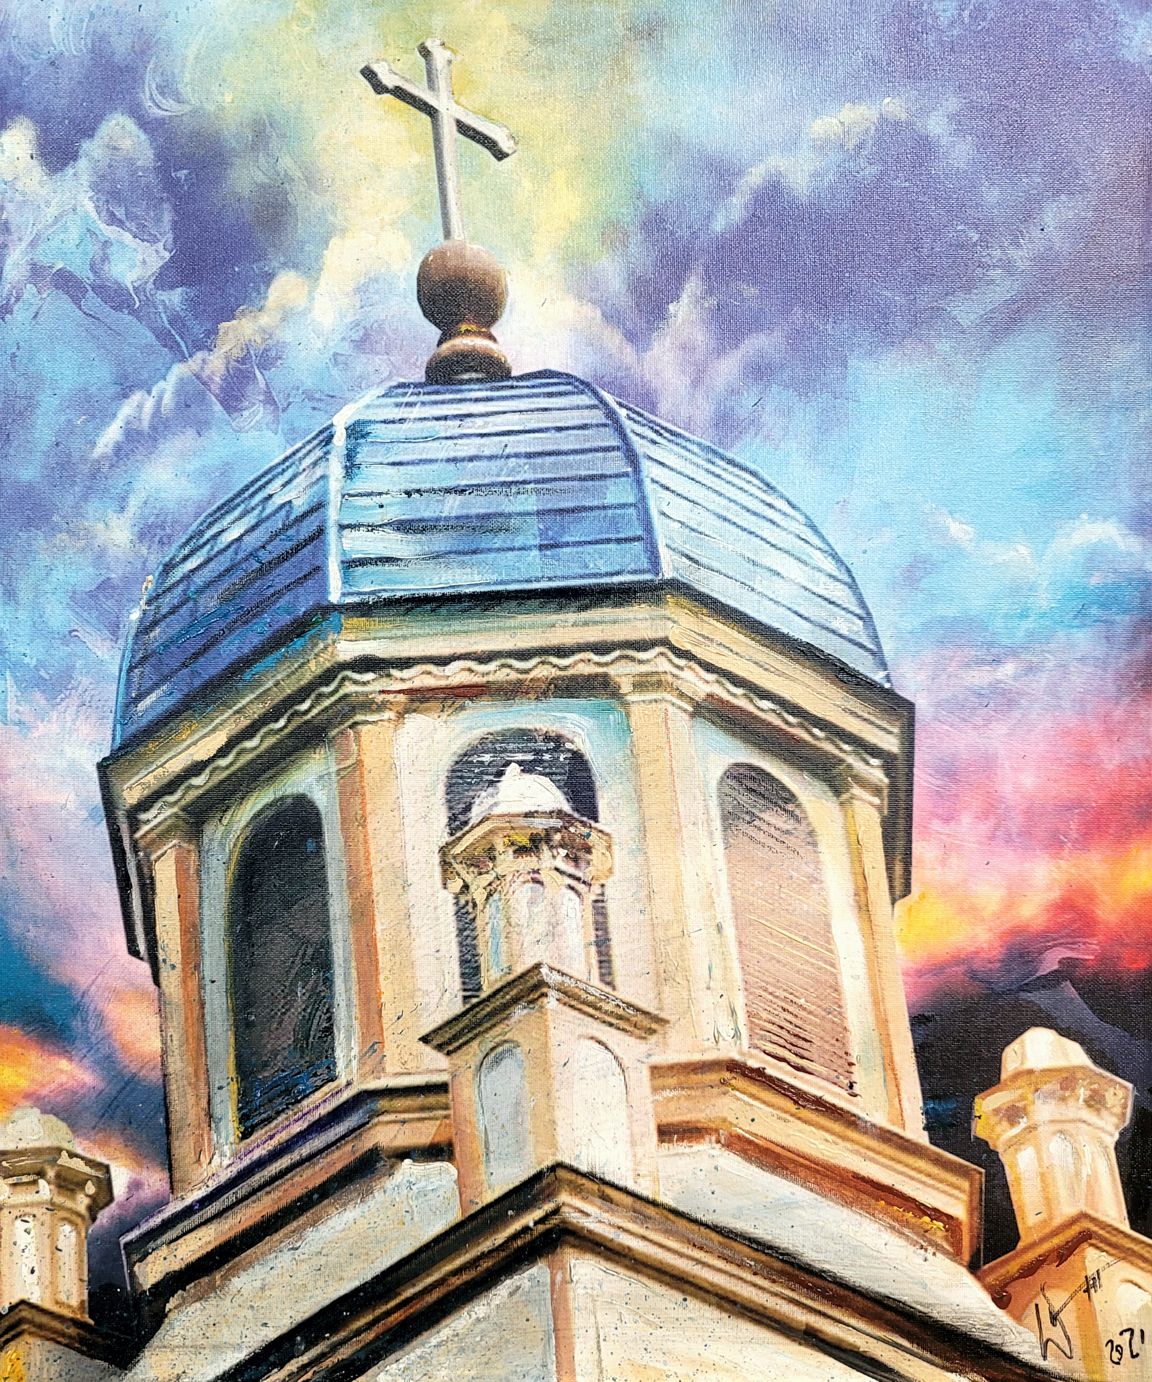 "UD Chapel" painting by artist, William III